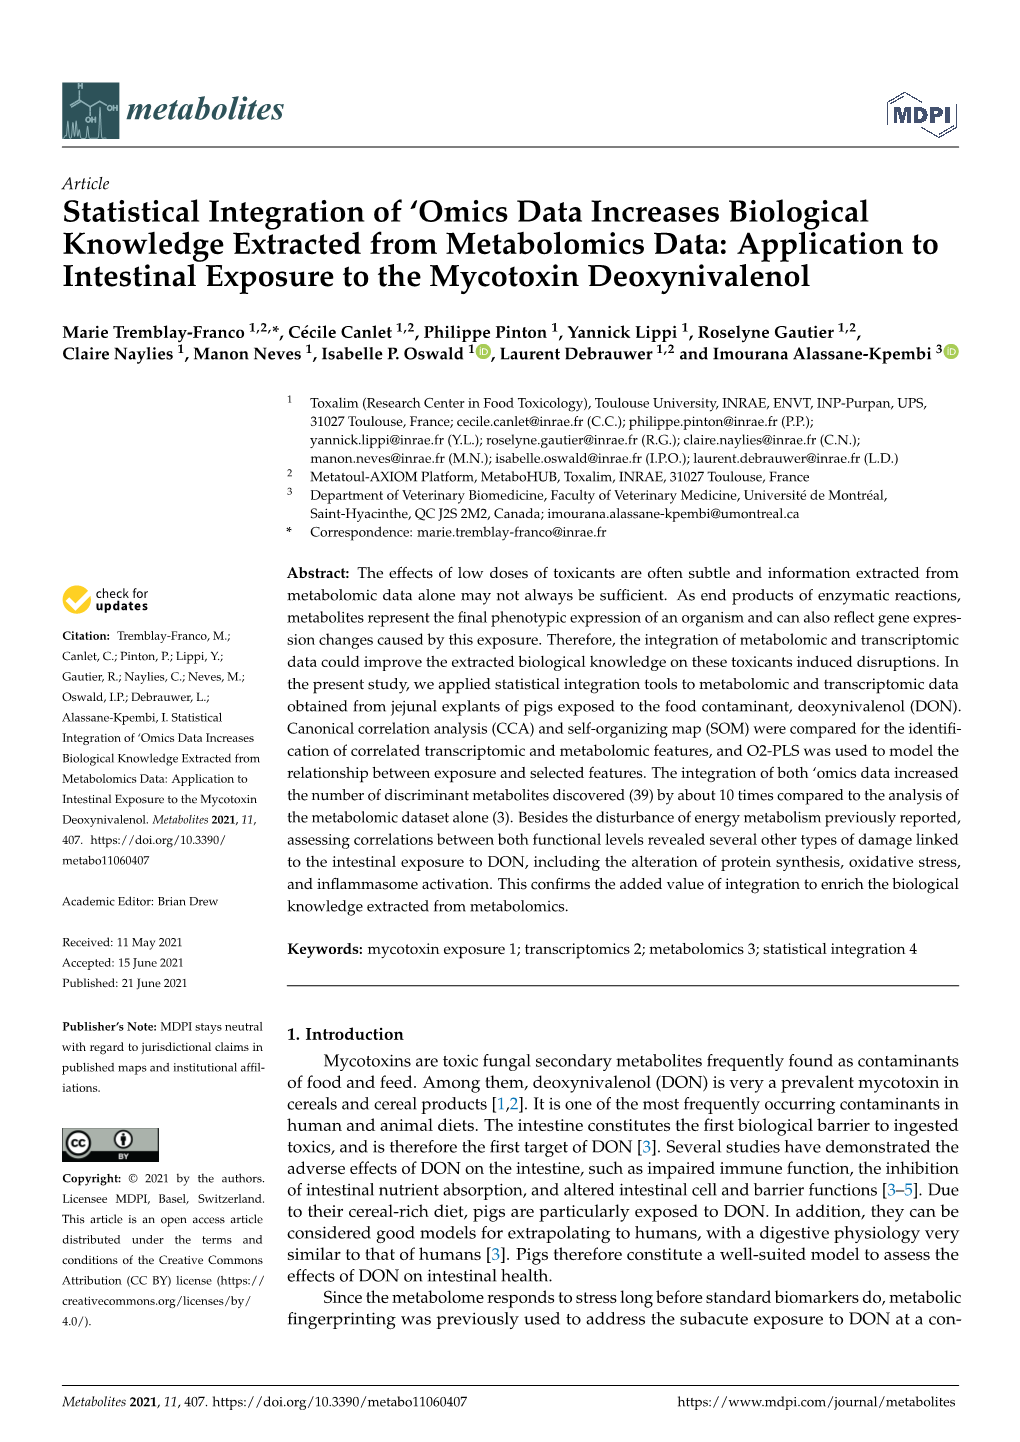 Statistical Integration of 'Omics Data Increases Biological Knowledge Extracted from Metabolomics Data: Application to Intesti